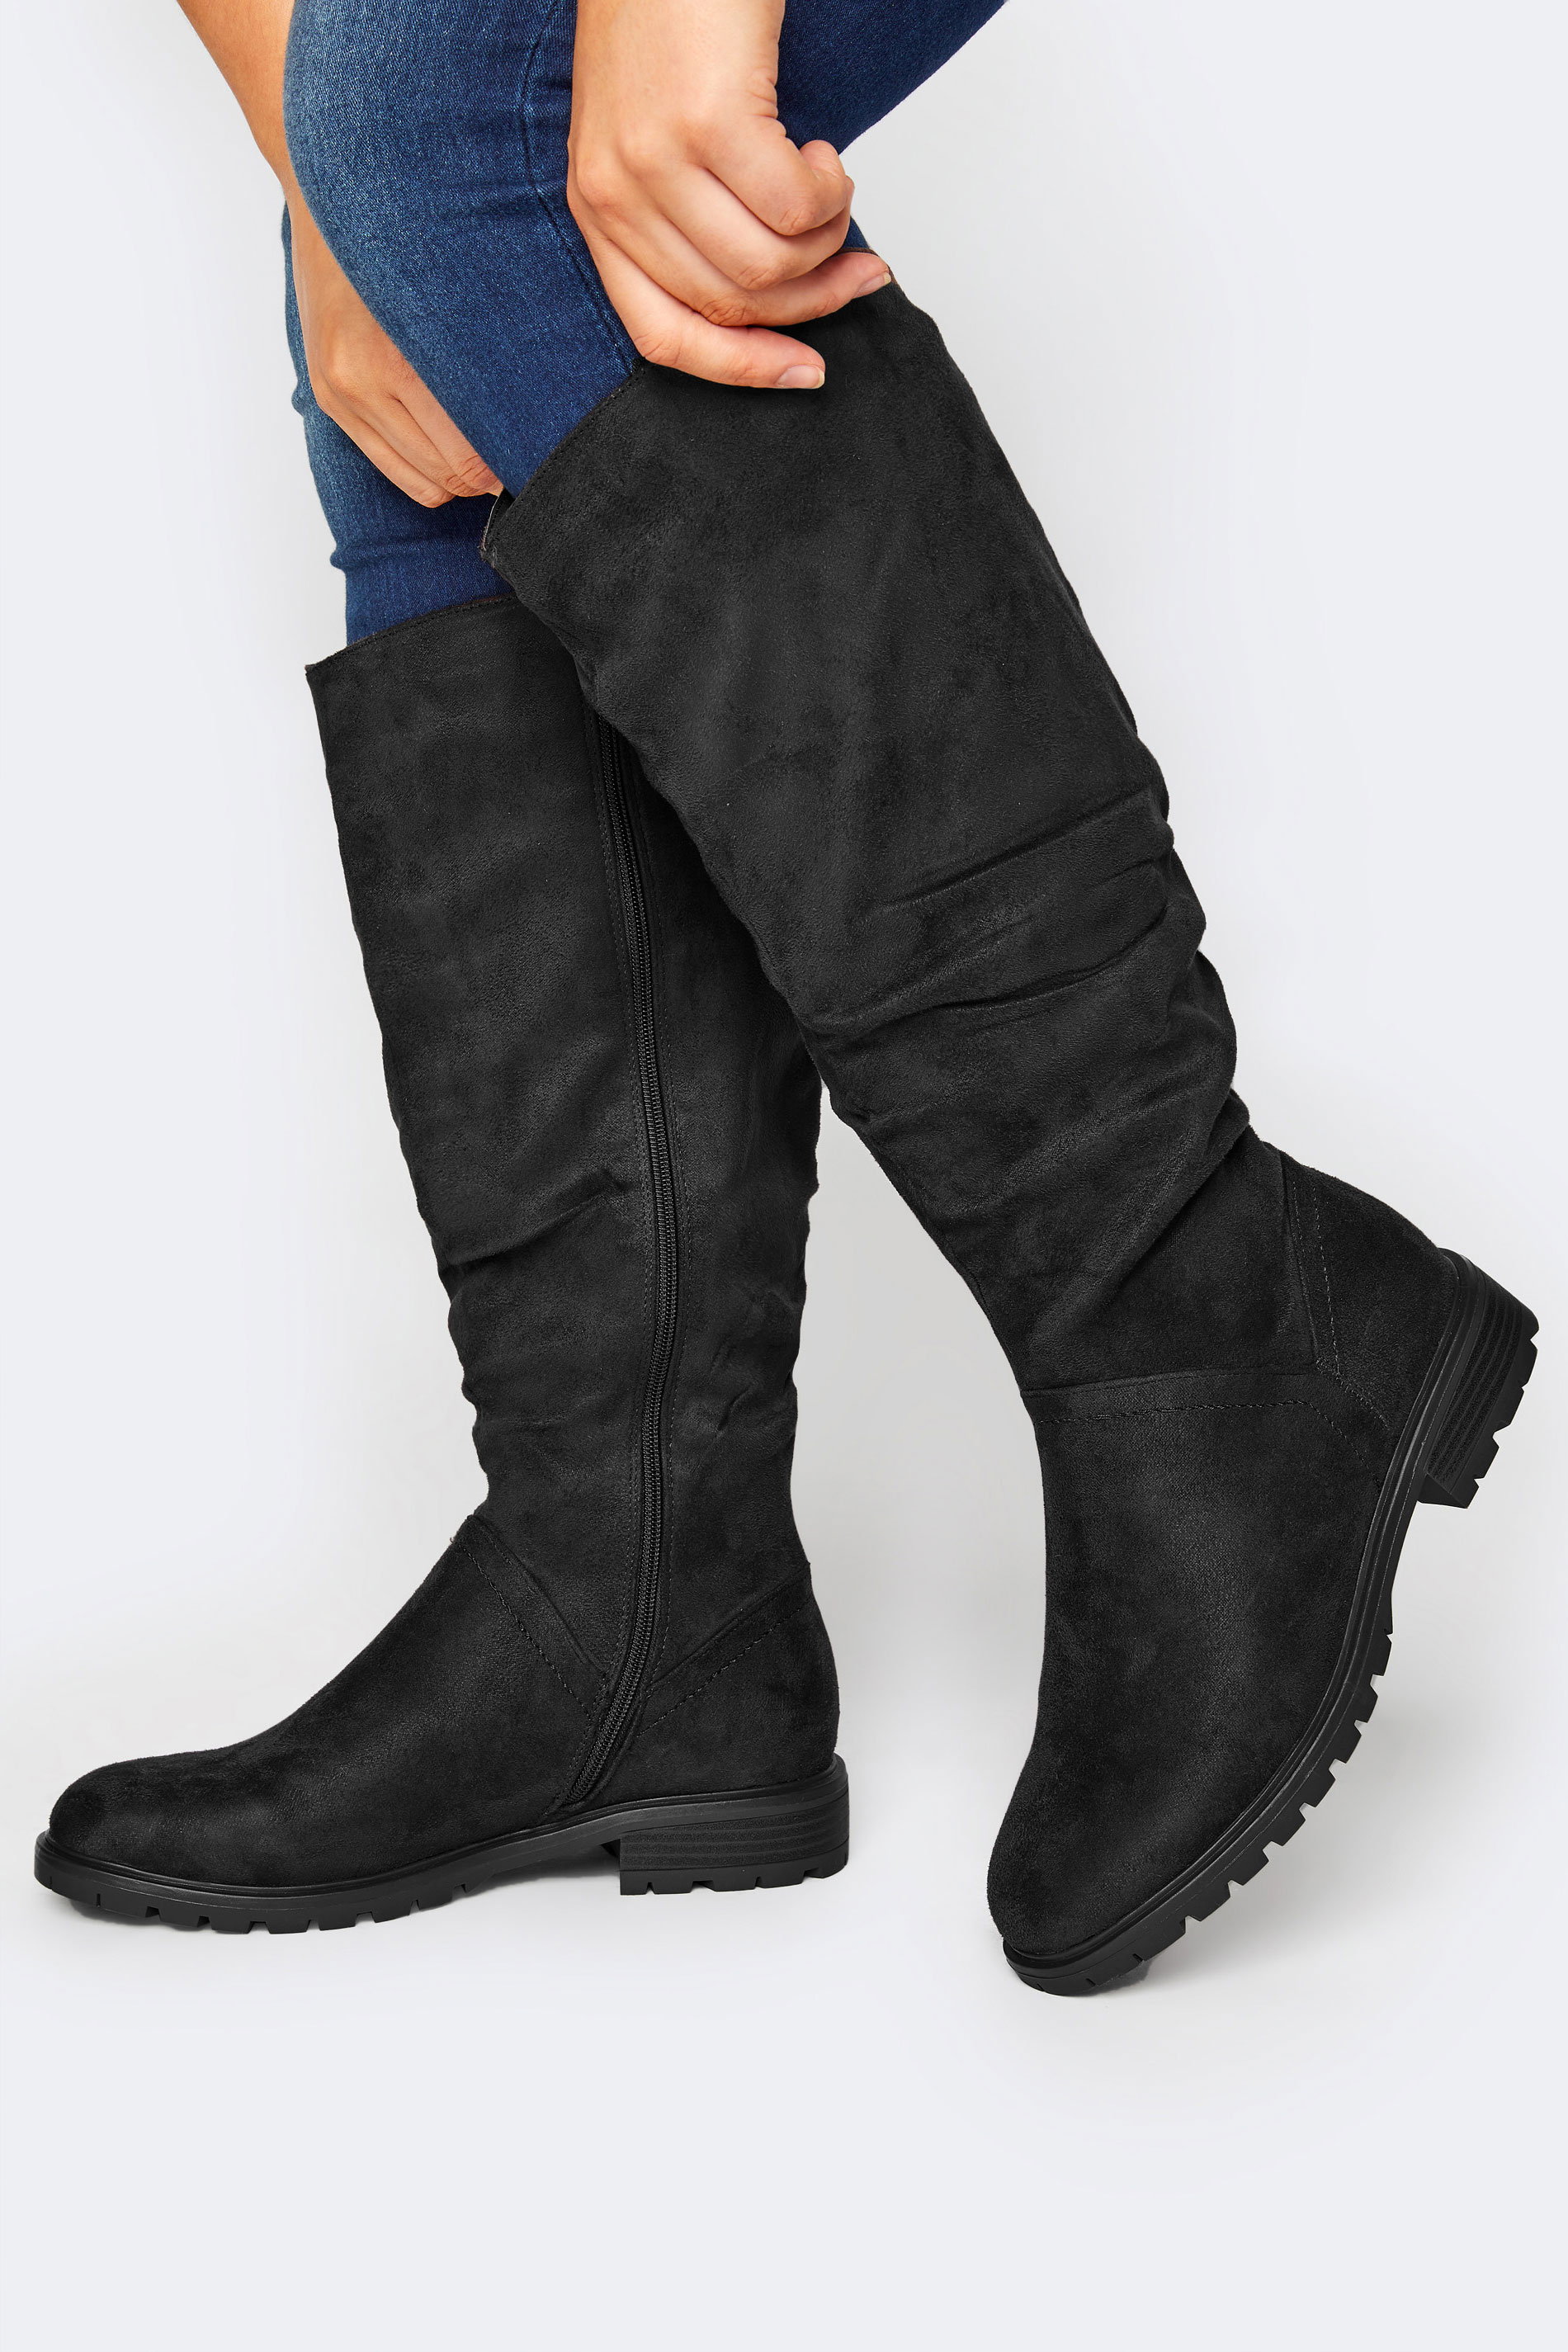 Black Ruched Cleated Boots In Wide E Fit & Extra Wide EEE Fit| Yours Clothing 1